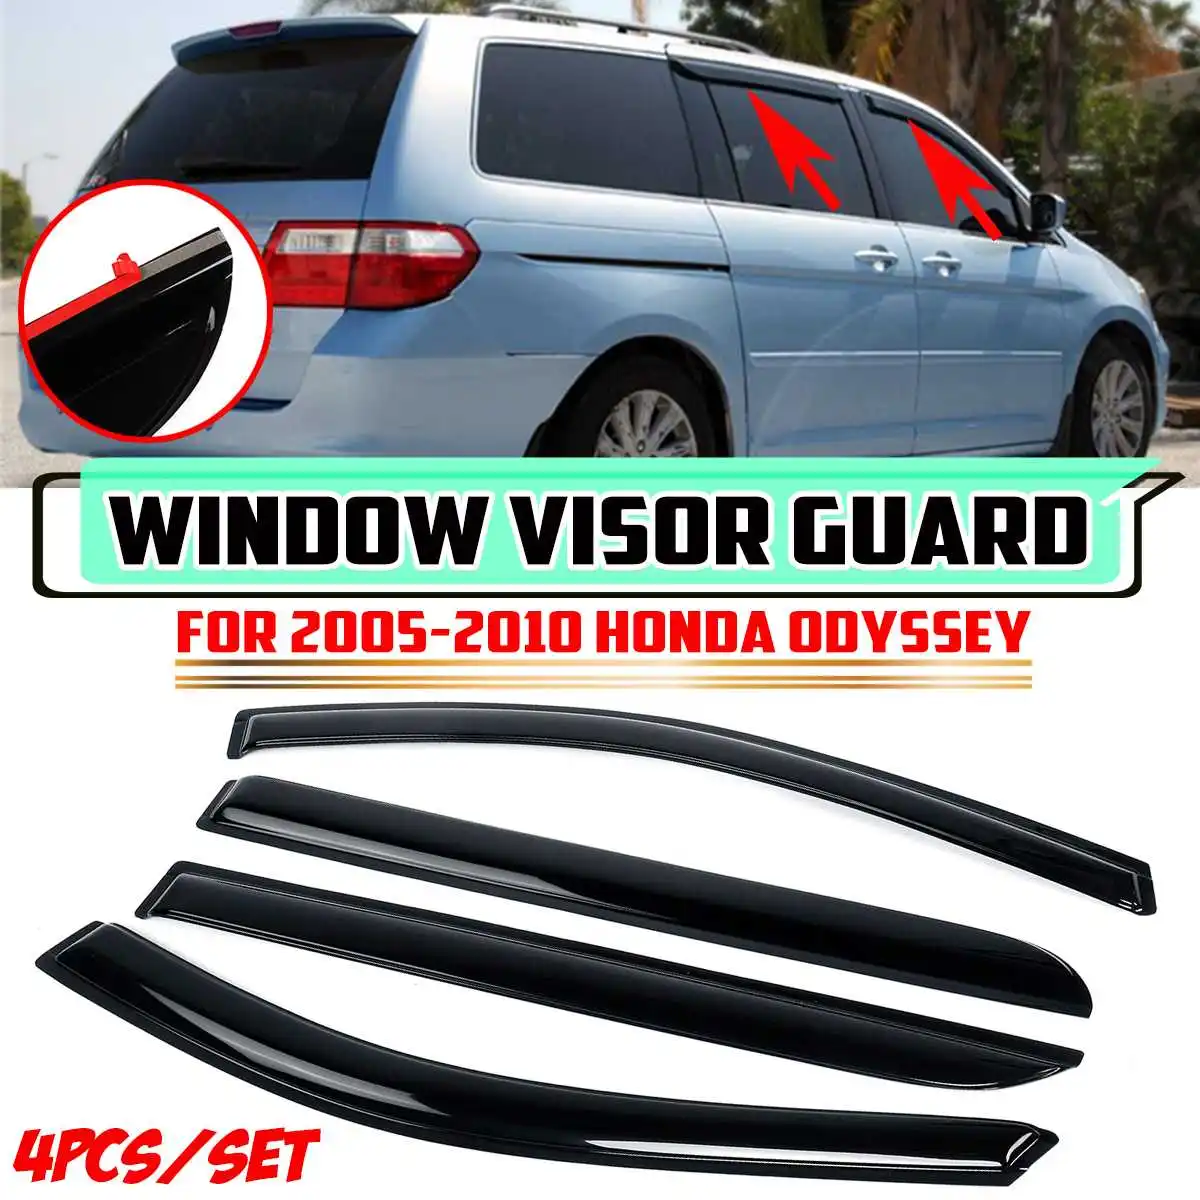 

Car Side Window Visors Deflector Rain Guard Decoration Awnings Shelters For Honda For Odyssey 2005-2017 Window Visor Rain Guard